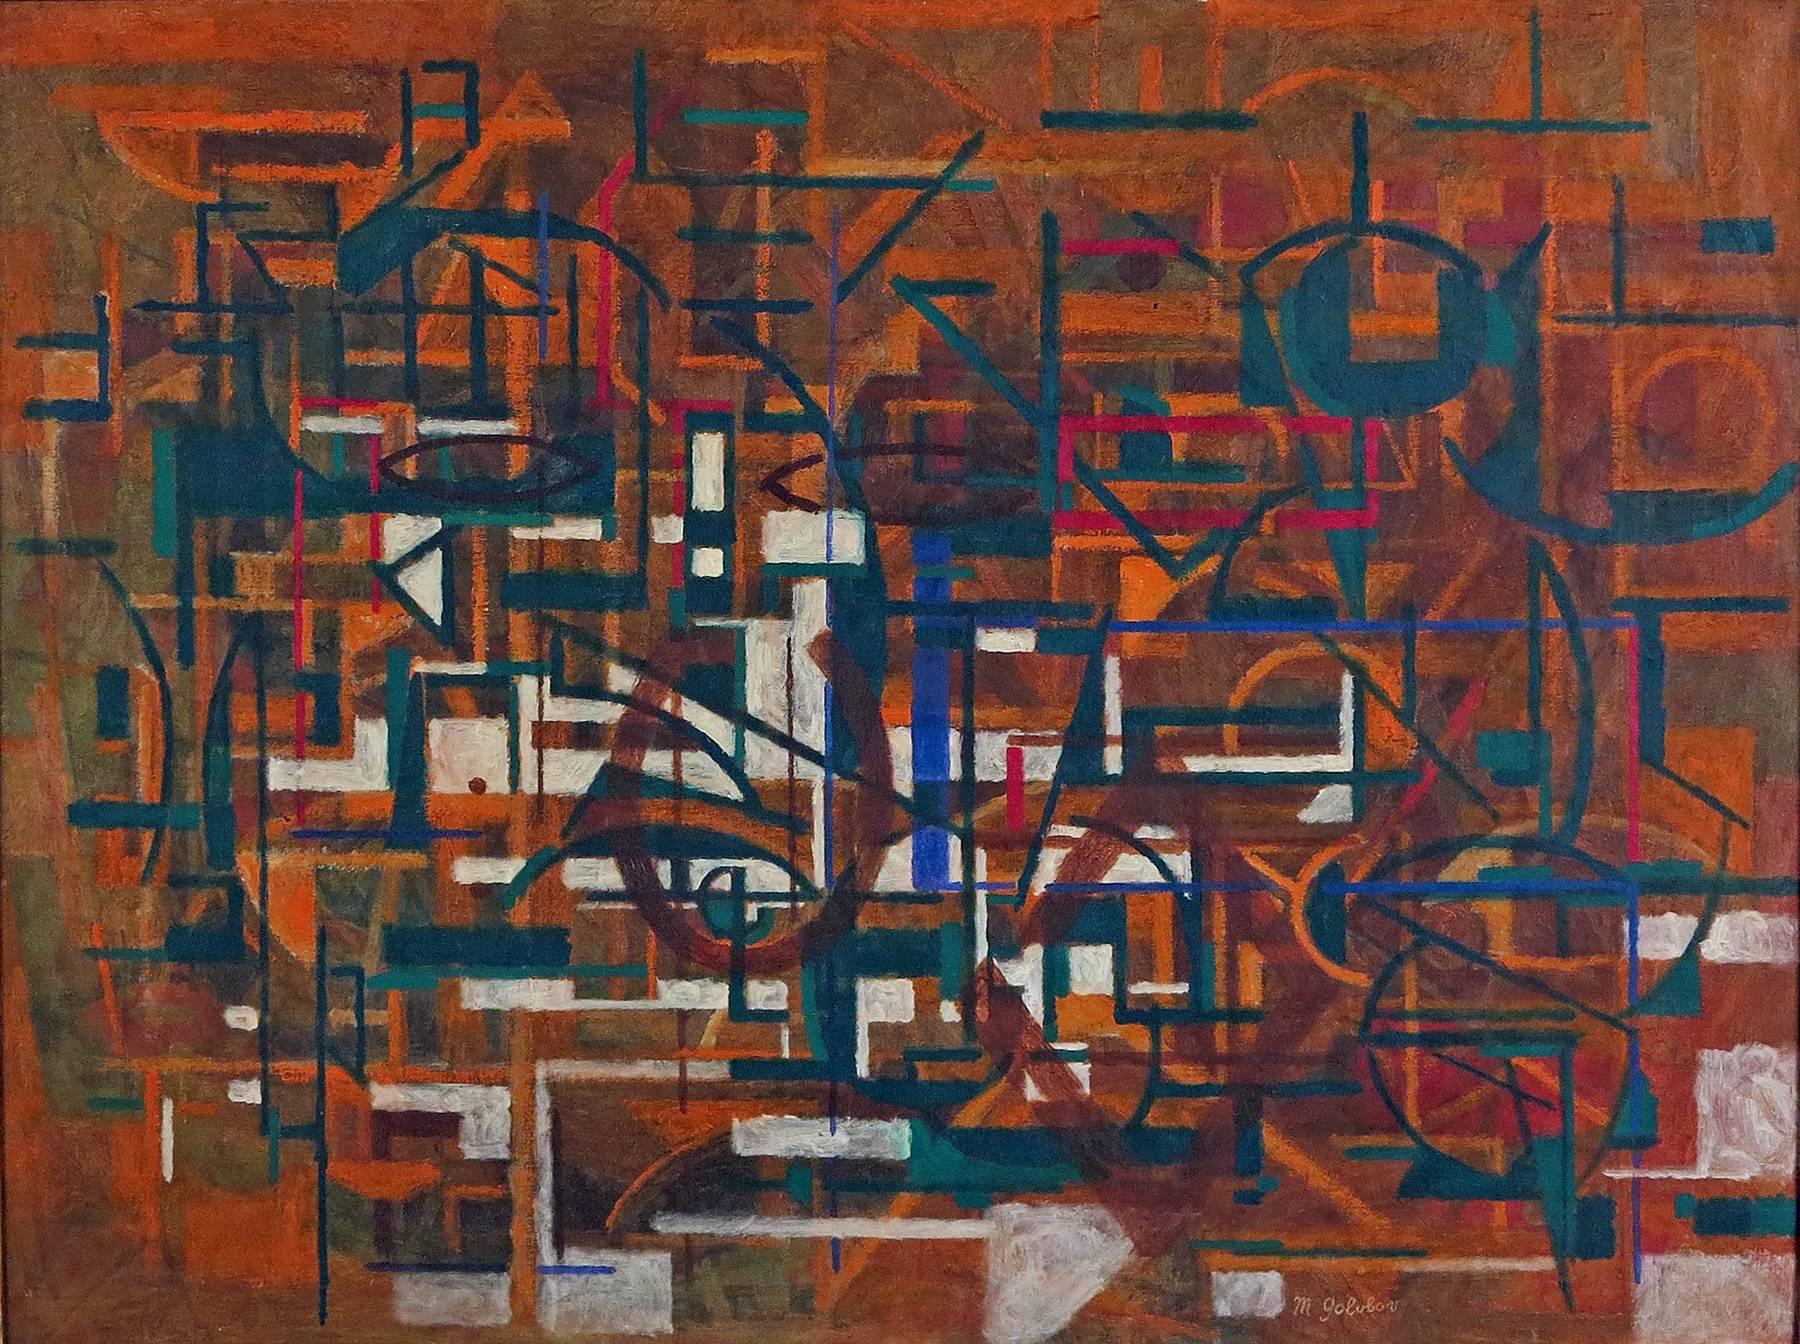 Maurice Golubov, 
Russian/American, 1905-1987.
Abstract.

Oil on Canvas
30 by 40 in. W/frame 34 by 44 in.

Biography

Maurice Golubov first studied art as a teenager during evening classes with John Sloan at a Hebrew Educational Society settlement